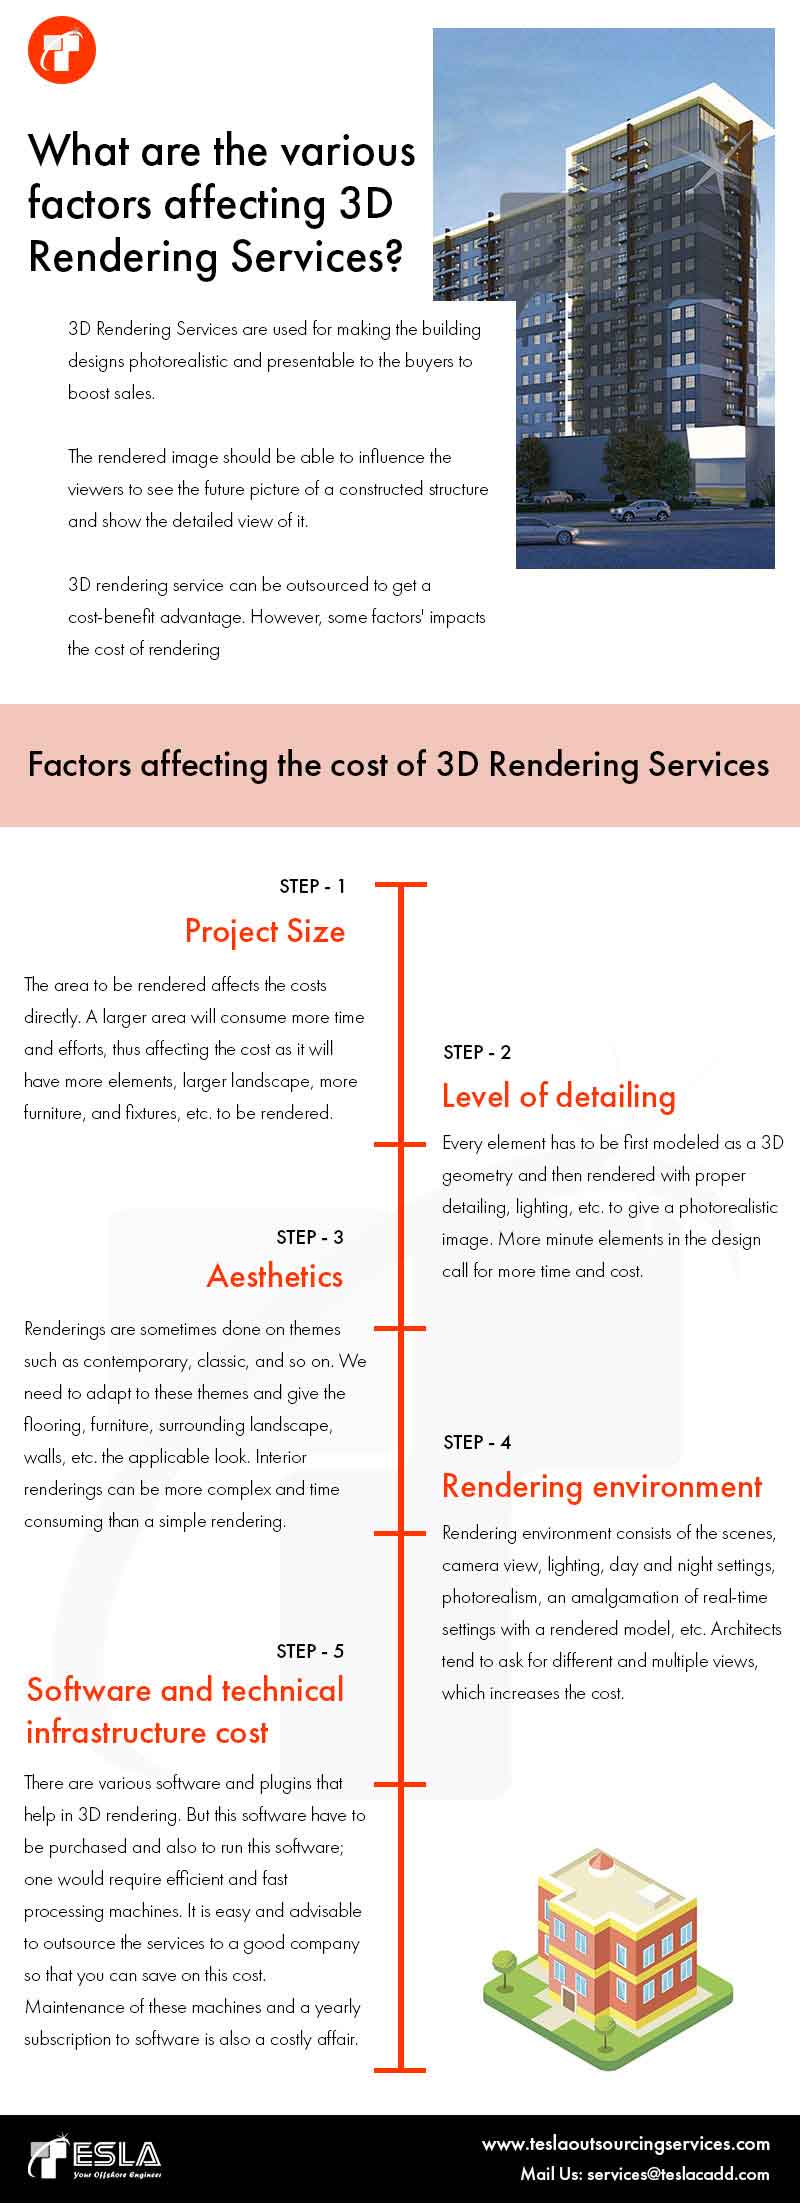 What are the various factors affecting 3D Rendering Services?
